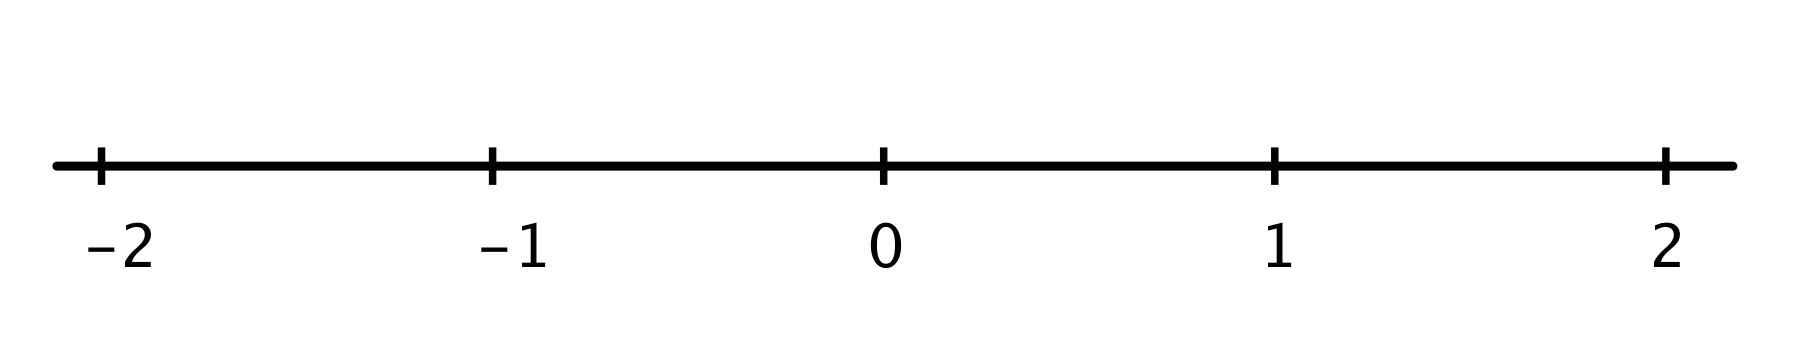 A number line with 5 evenly spaced tick marks. The numbers negative 2 through 2 are indicated.